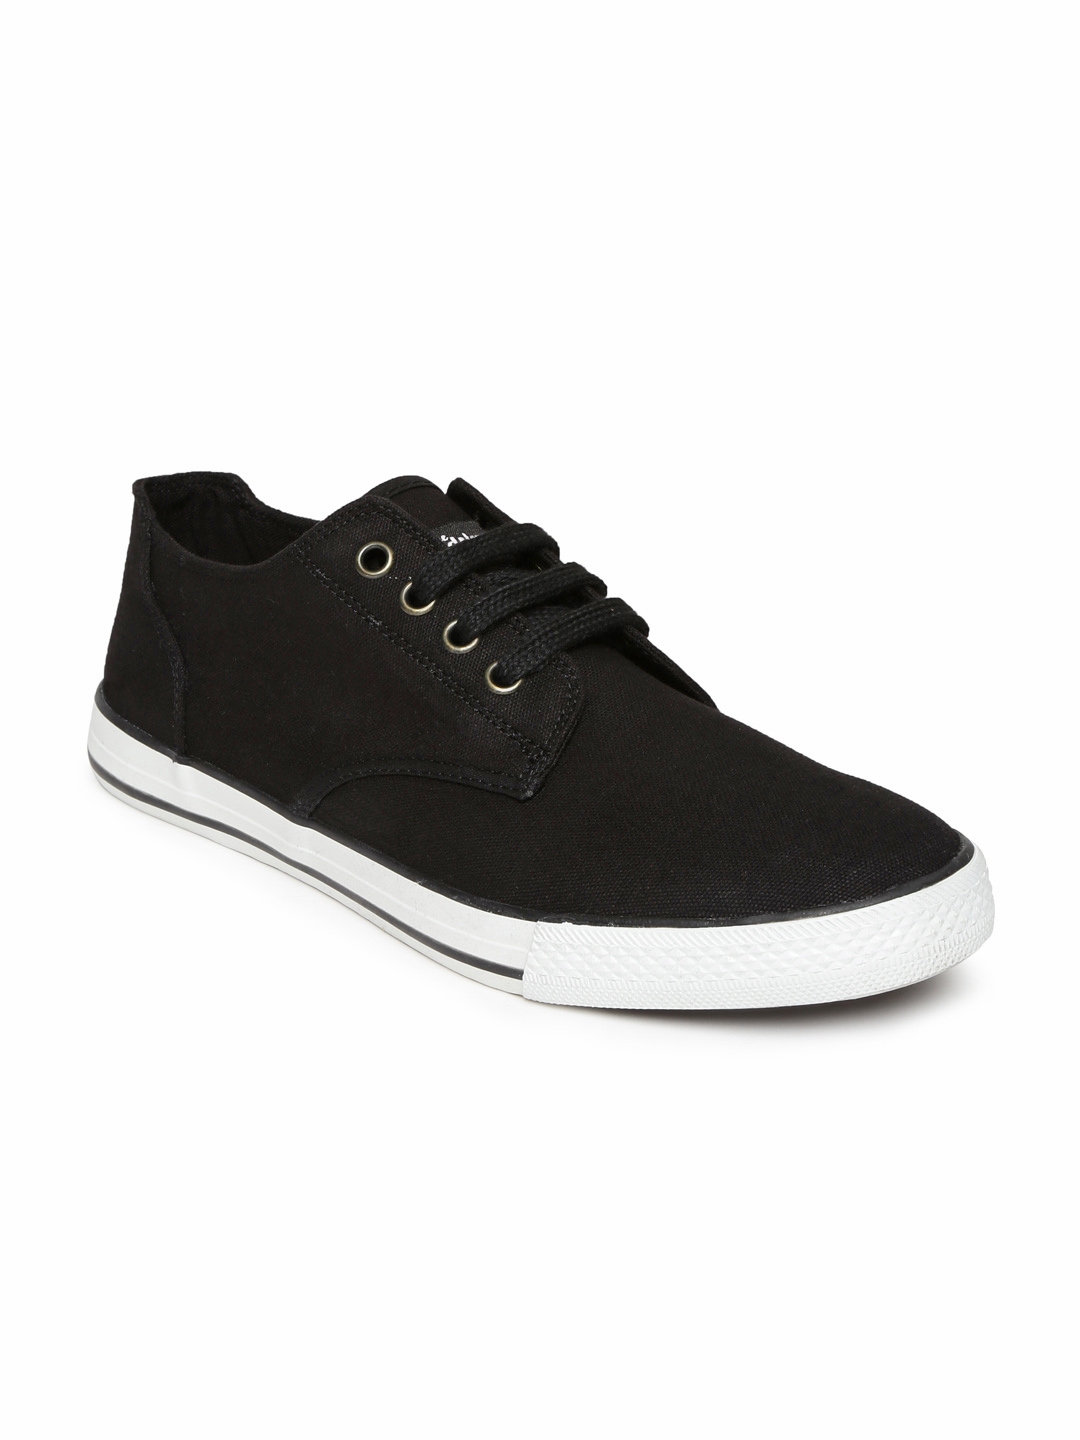 Buy Roadster Men Black Casual Shoes - Casual Shoes for Men 1095386 | Myntra